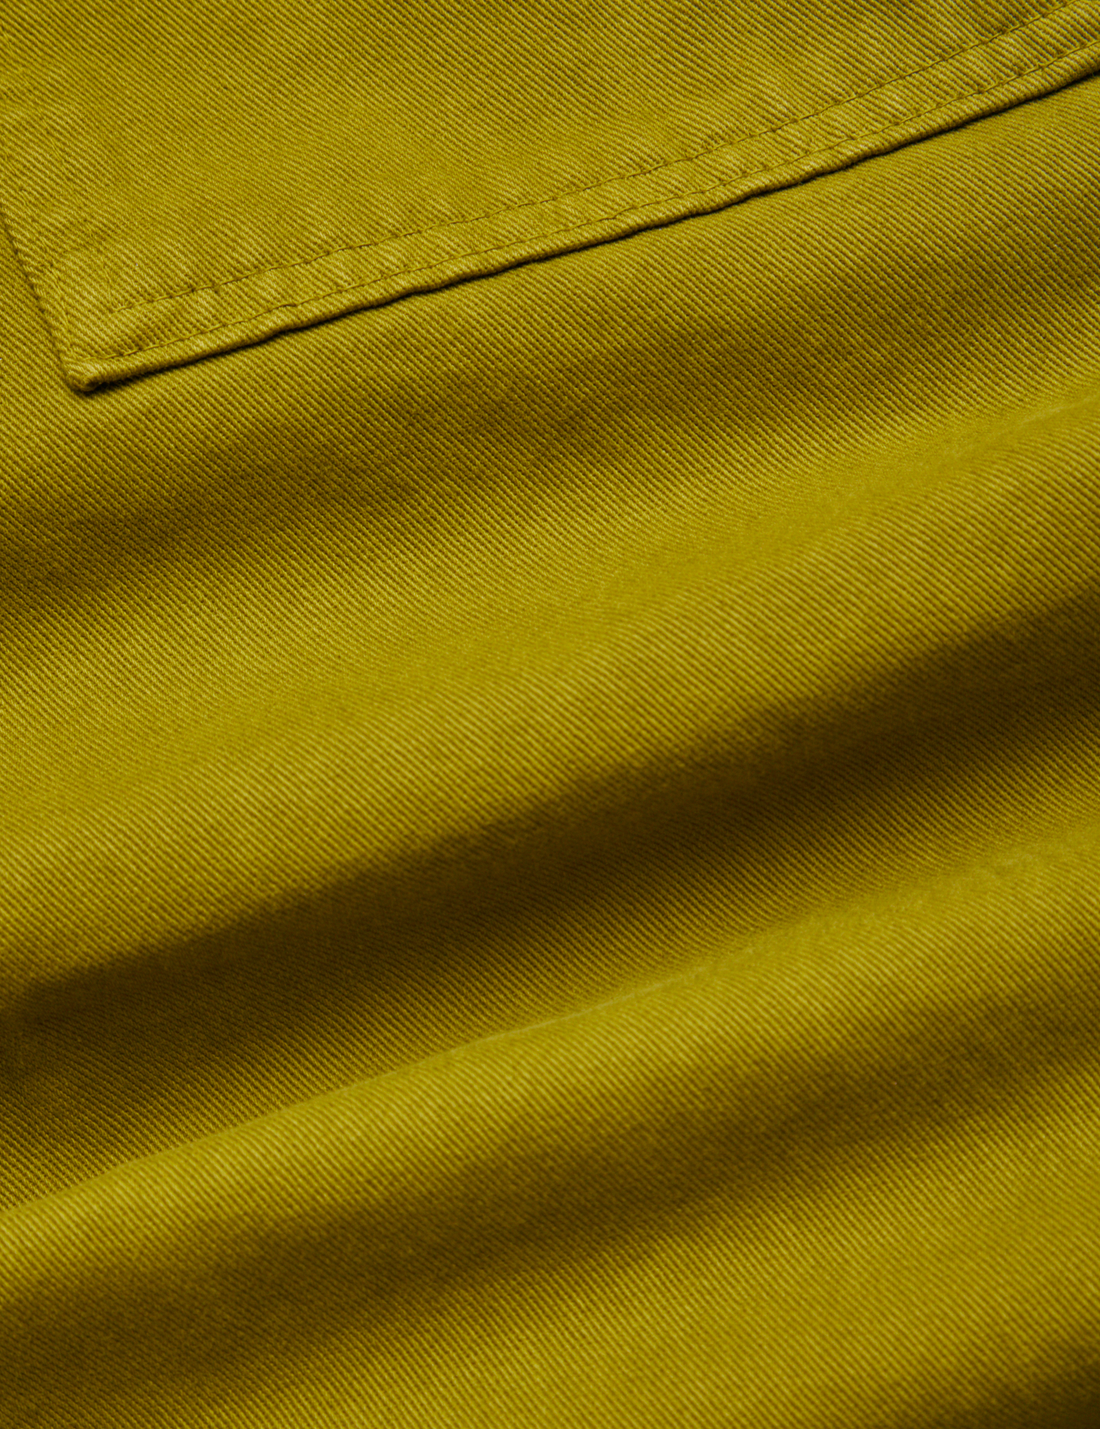 Work Pants in Olive Green detail close up of fabric